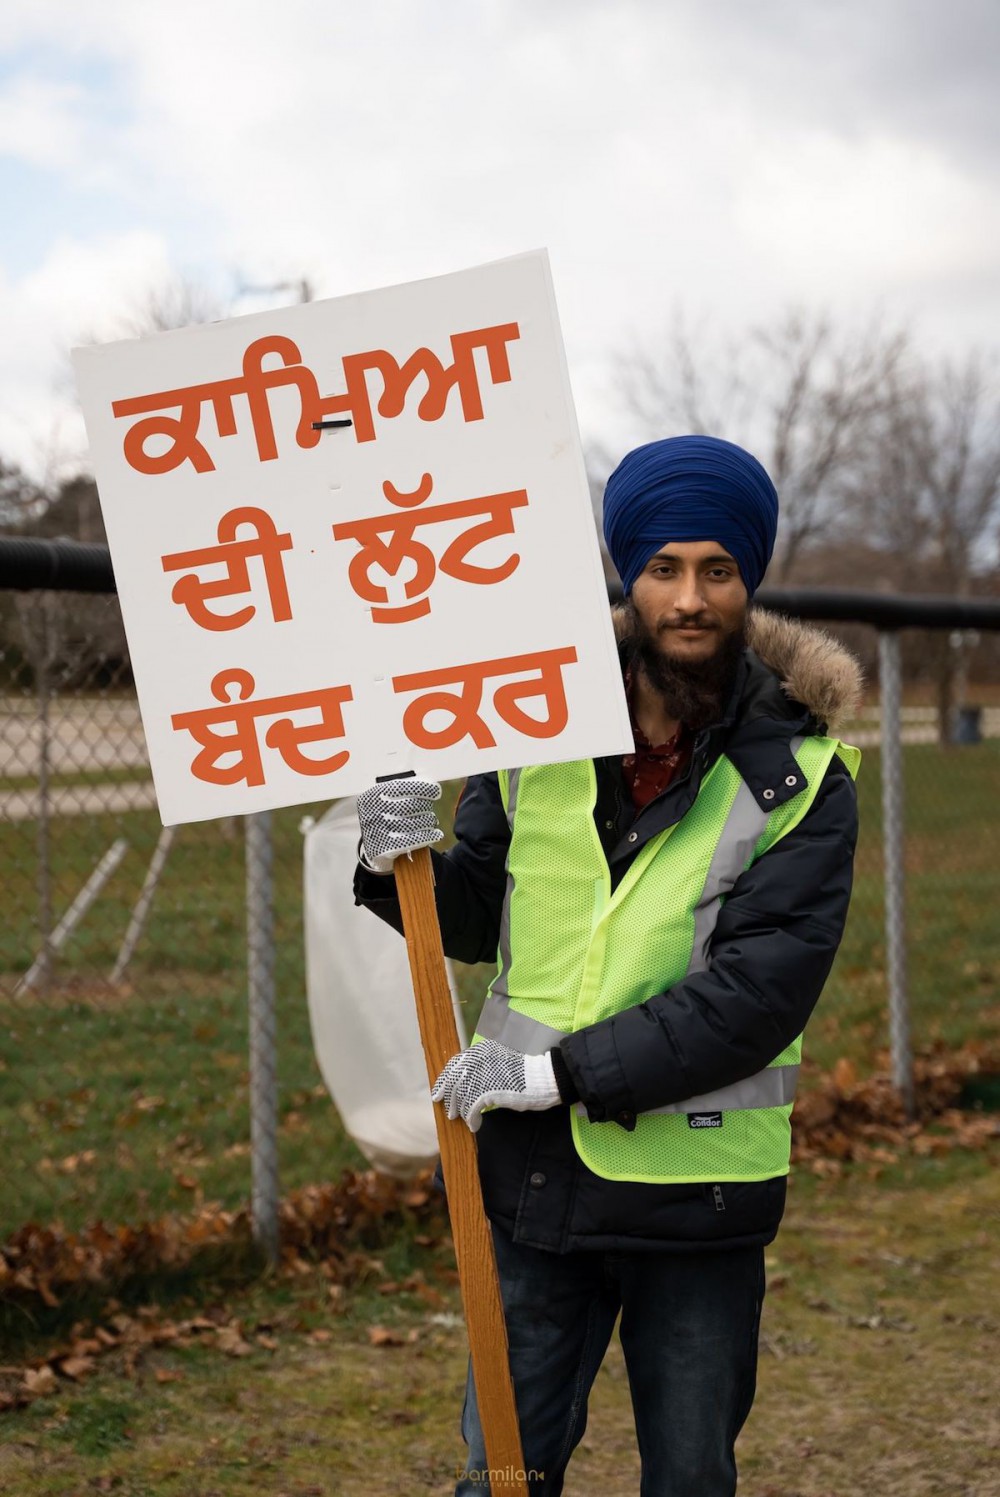 A photo of Navpreet holding a banner in Panjabi. The words on the banner translate to